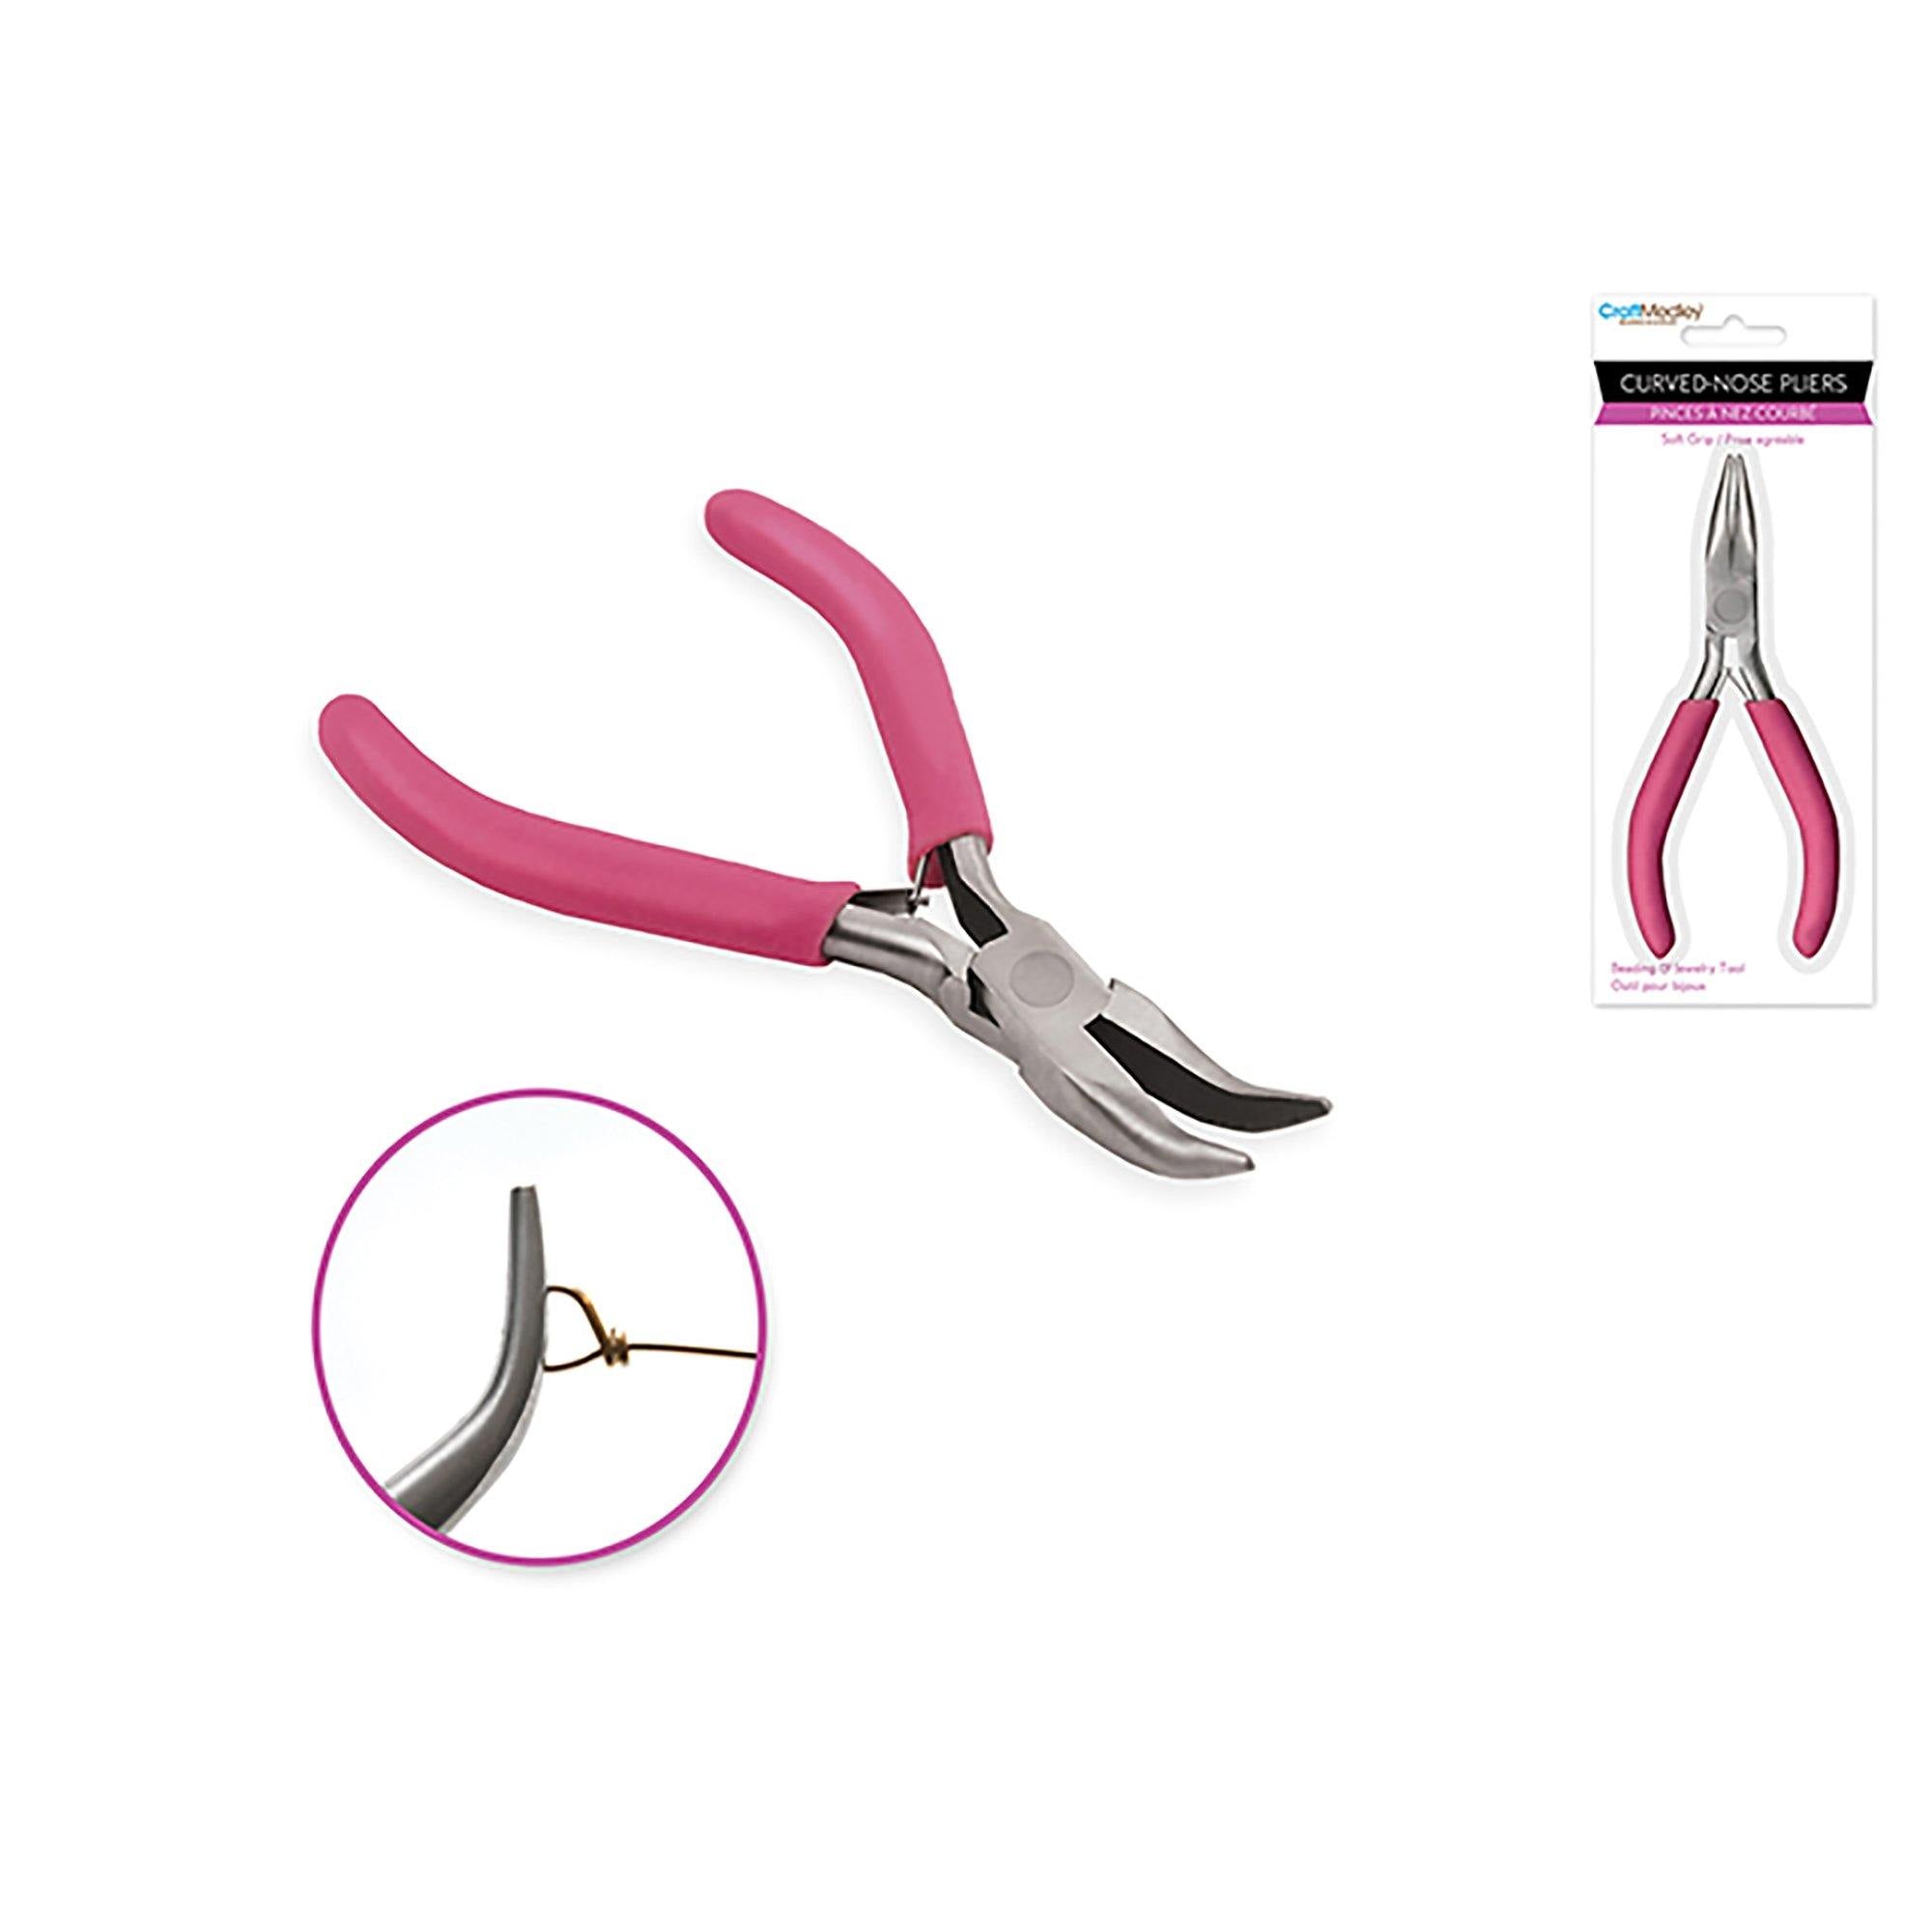 Beading / Jewelry Tool : Curved Nose Pliers W / Soft Grip Handle - Dollar Max Dépôt